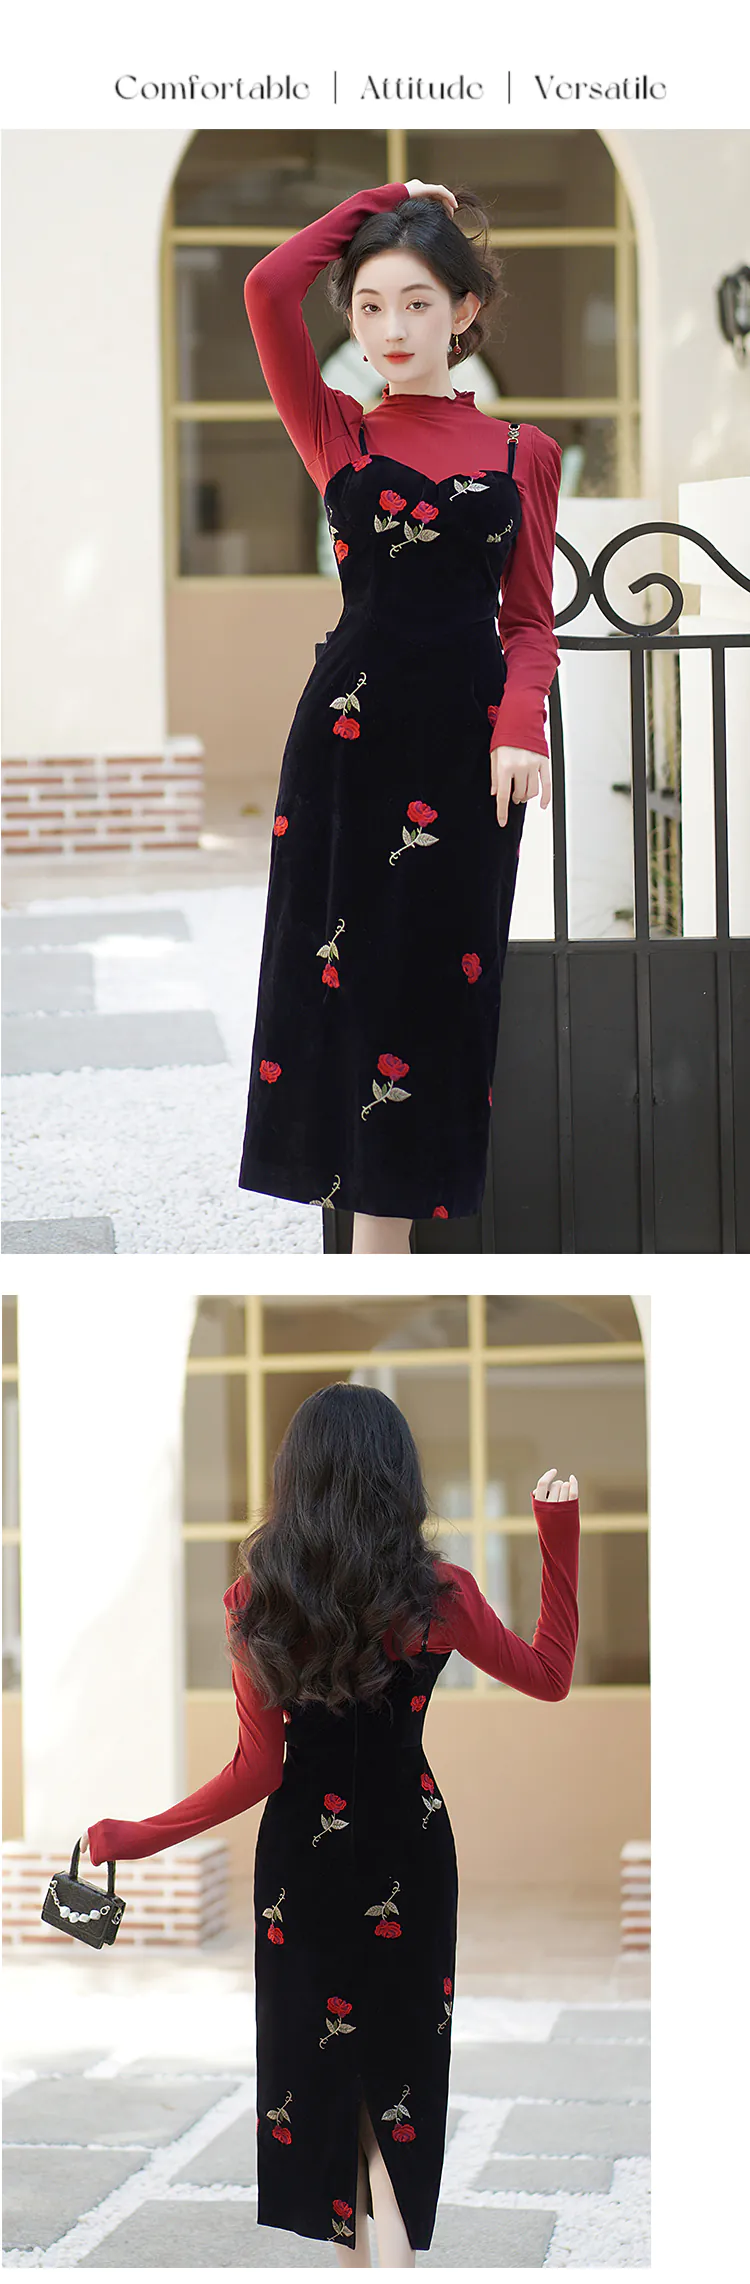 Sweet-Rose-Embroidery-Black-Slip-Dress-with-Red-Sweater-Casual-Outfit09